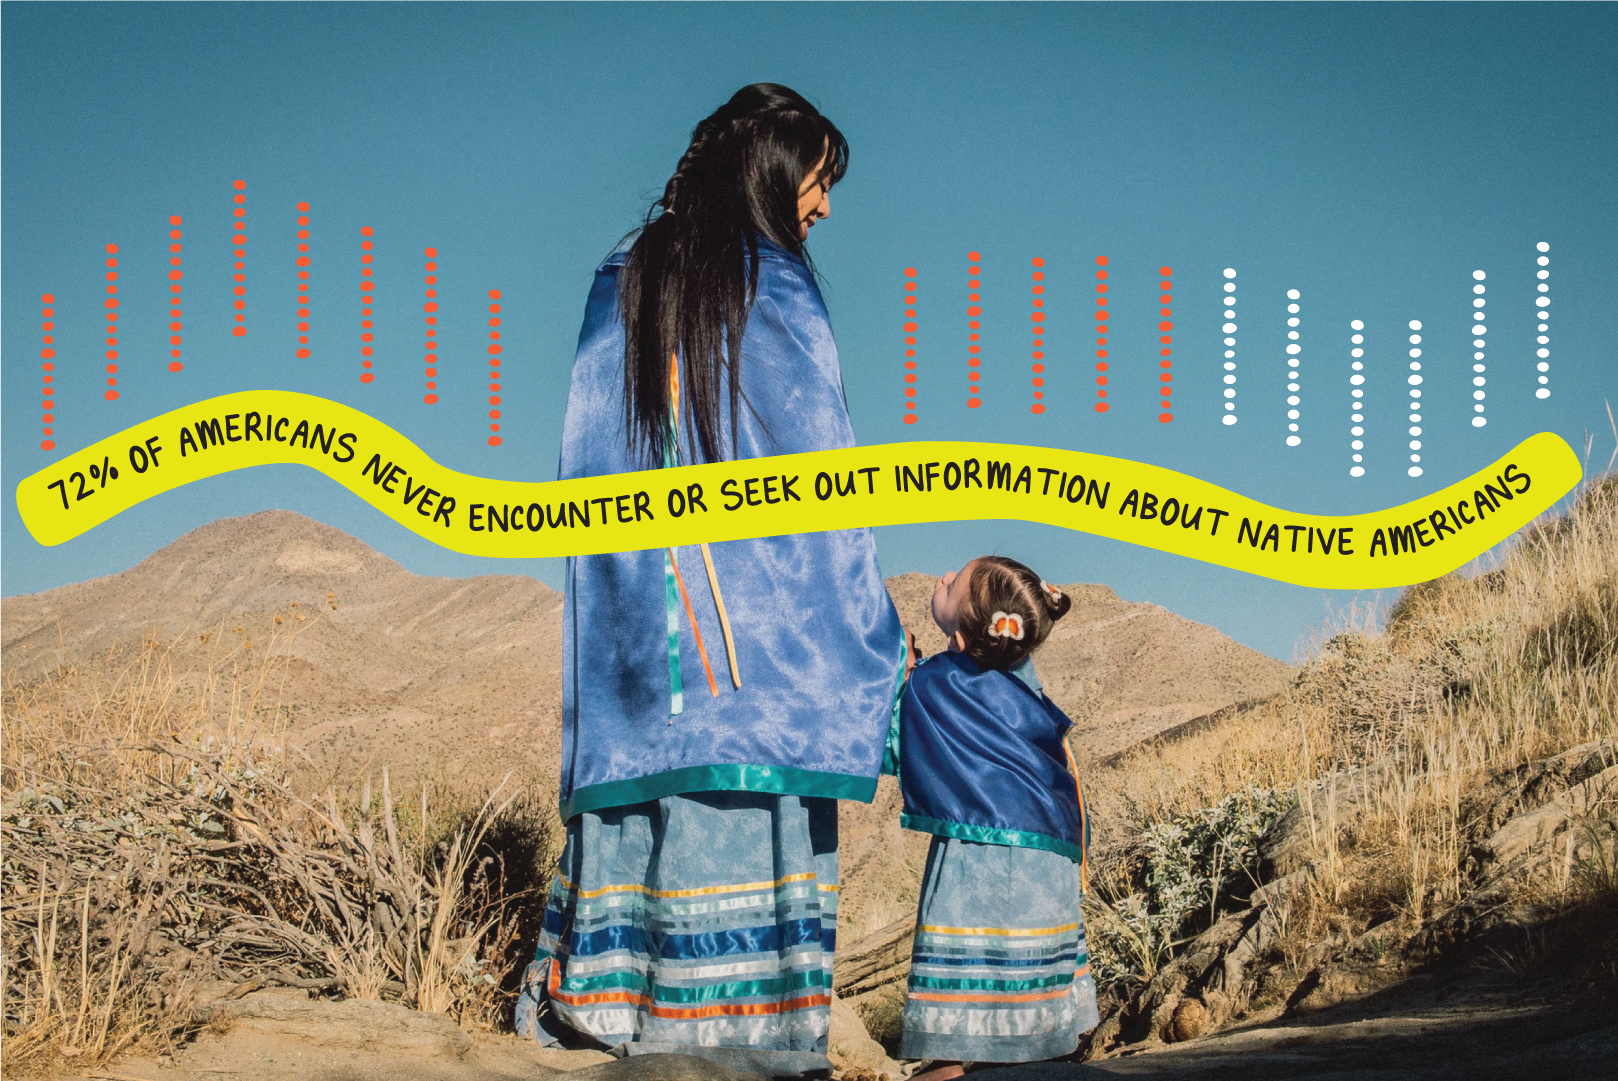 Picture of a Native woman and her child wearing blue dresses with mountains and desert in the background. The text on the image reads: "72% of Americans never encounter or seek out information about Native Americans."